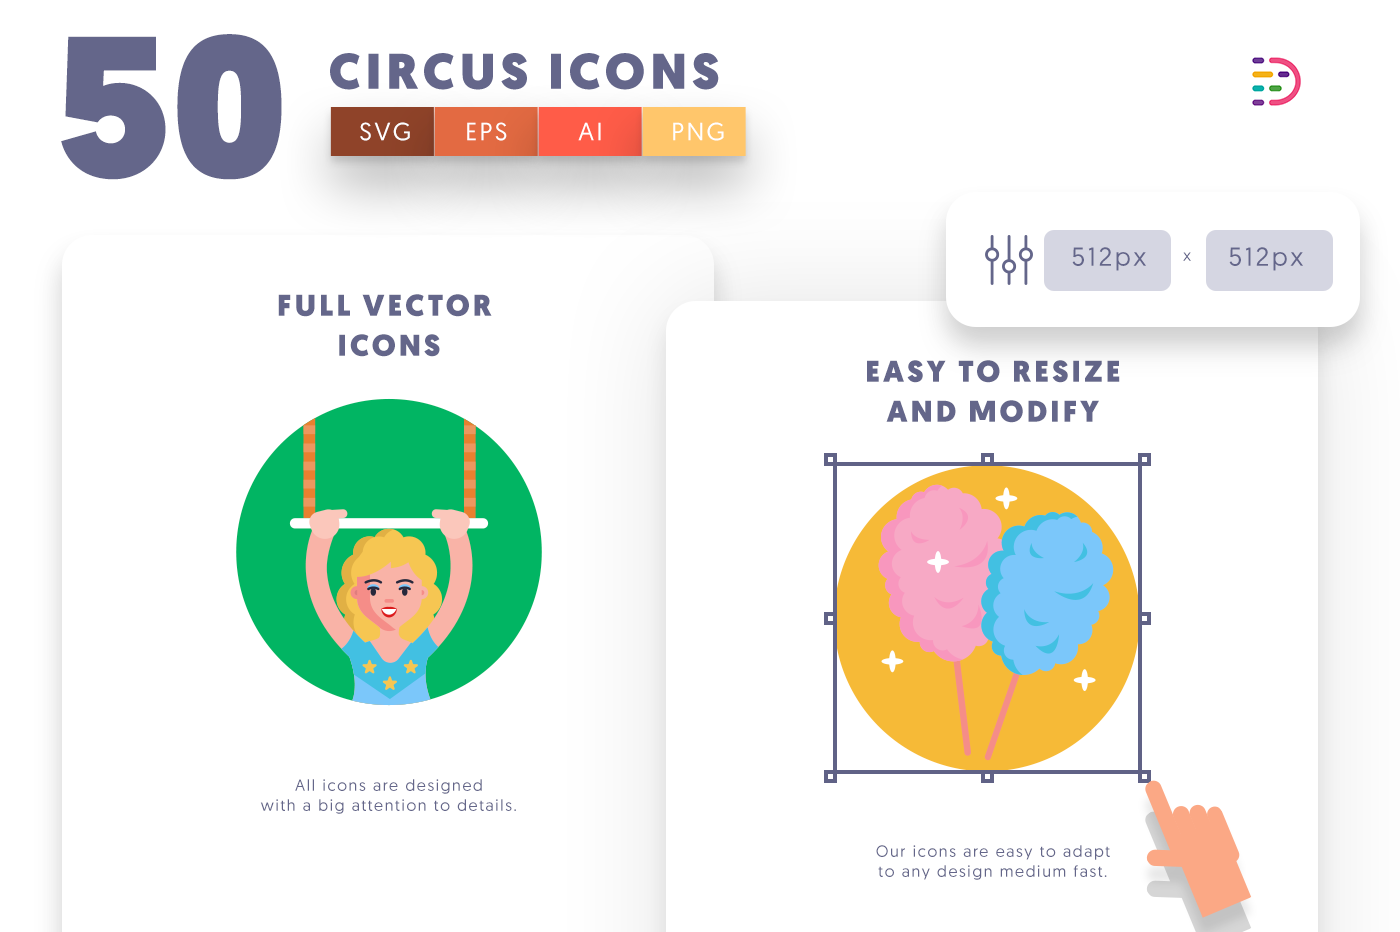 Full vector 50 Circus Icons